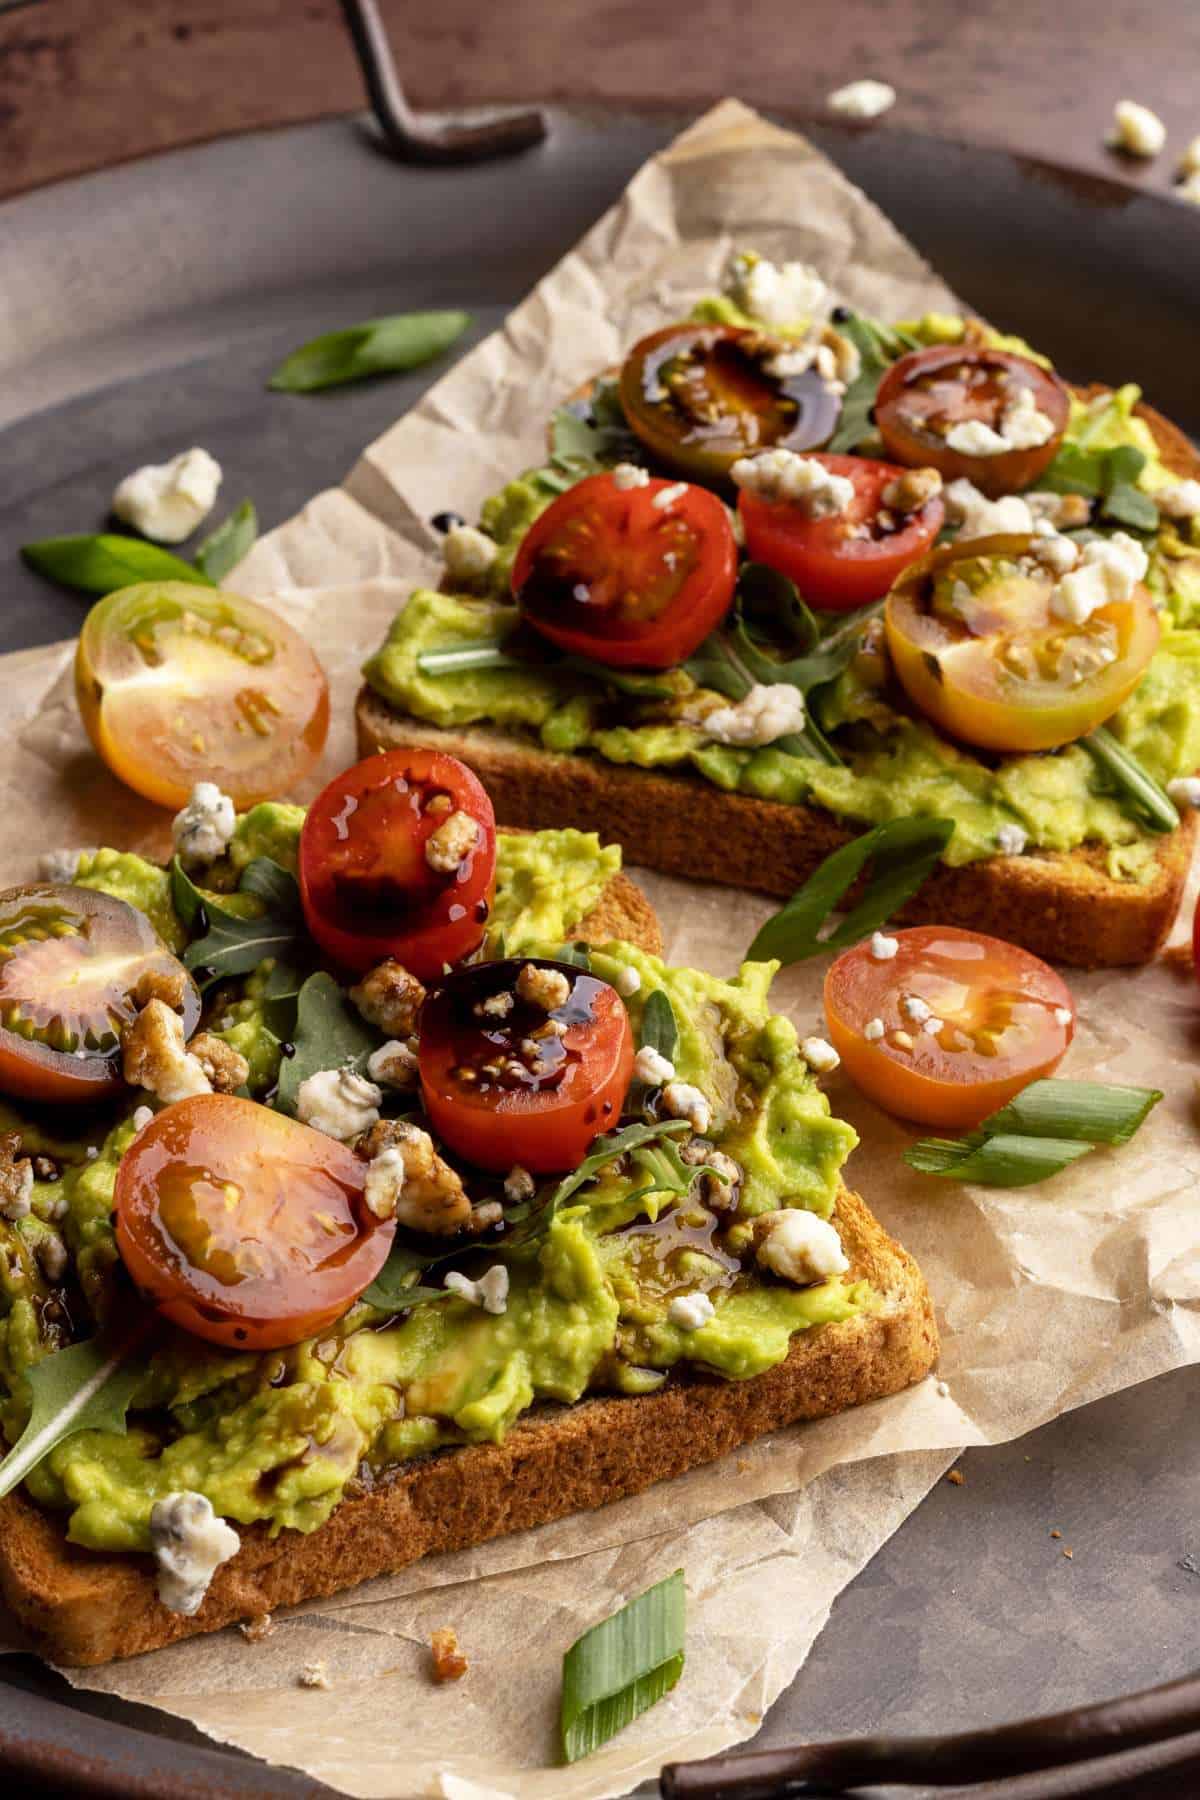 Avocado toast with cherry tomatoes and balsamic glaze.